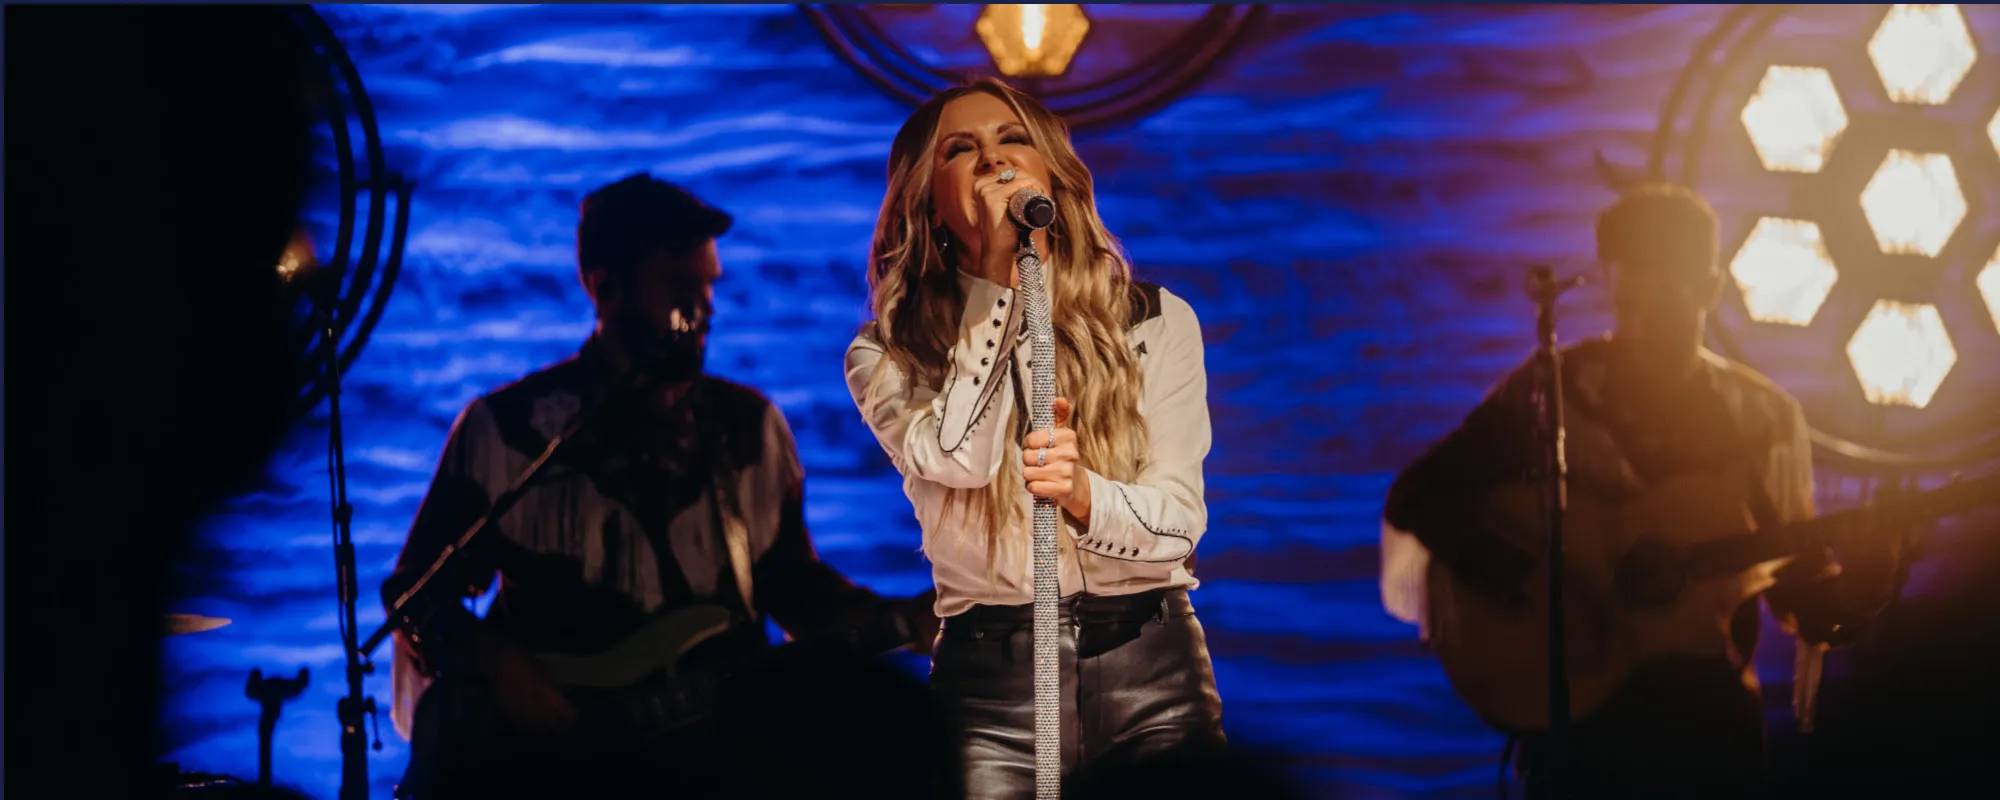 Carly Pearce Announces New 2022 Tour Dates